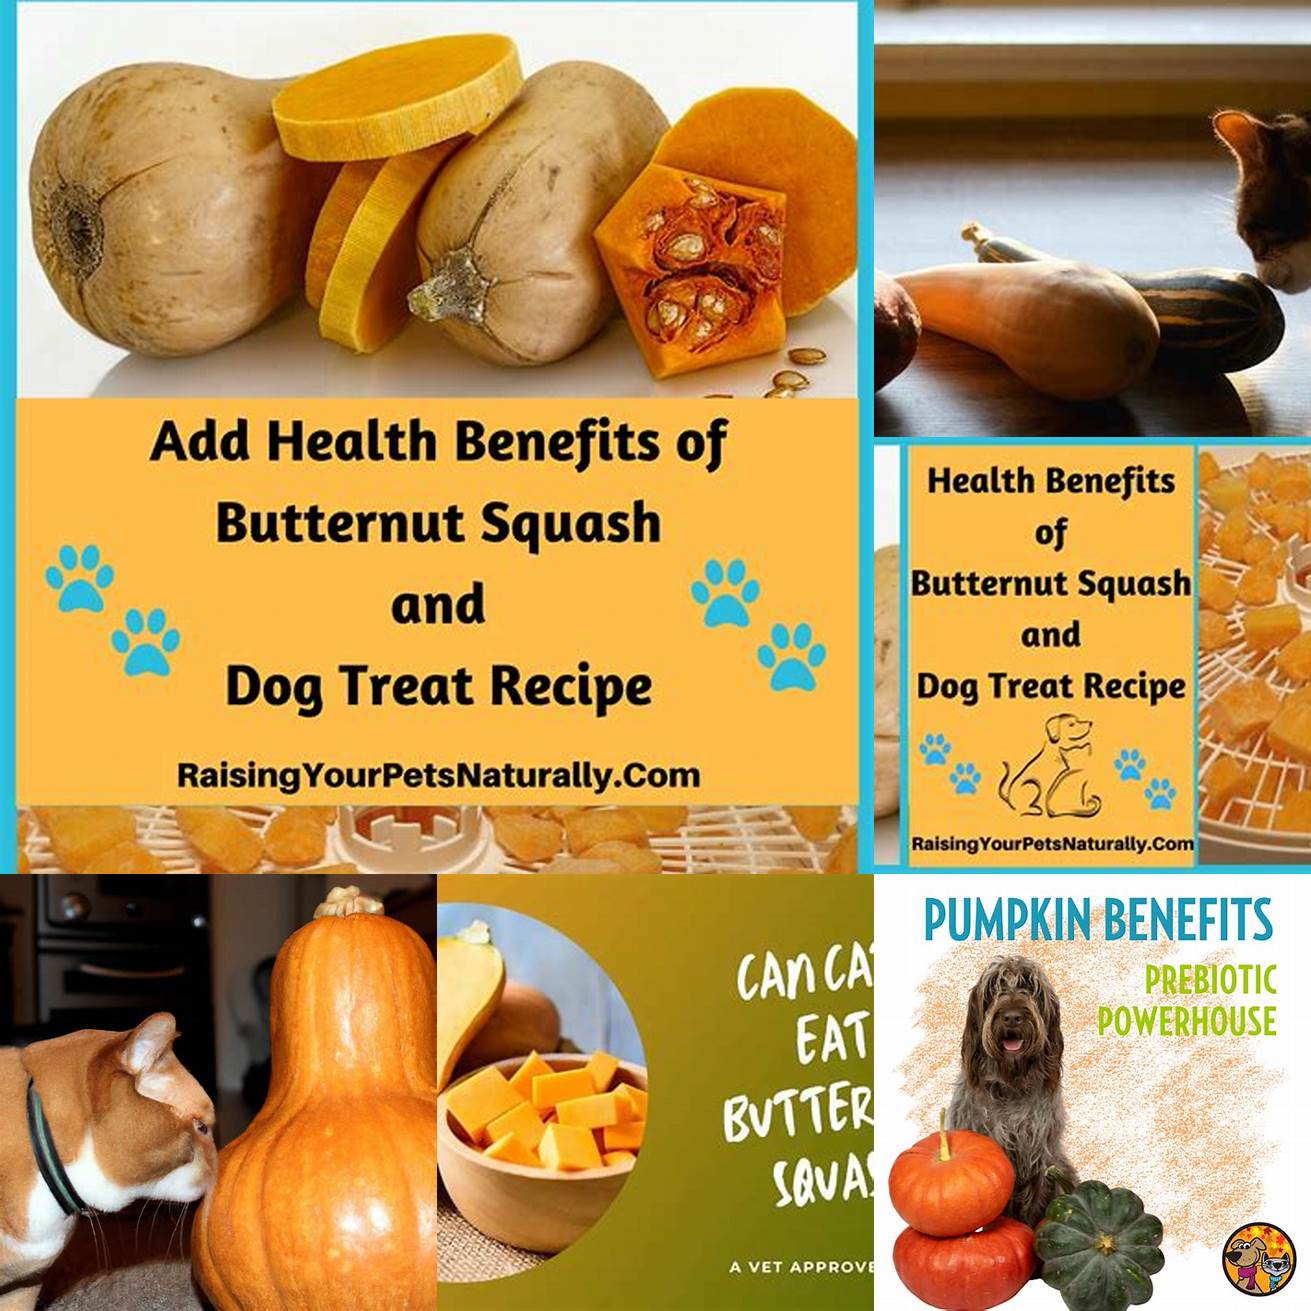 2 Is butternut squash beneficial for cats